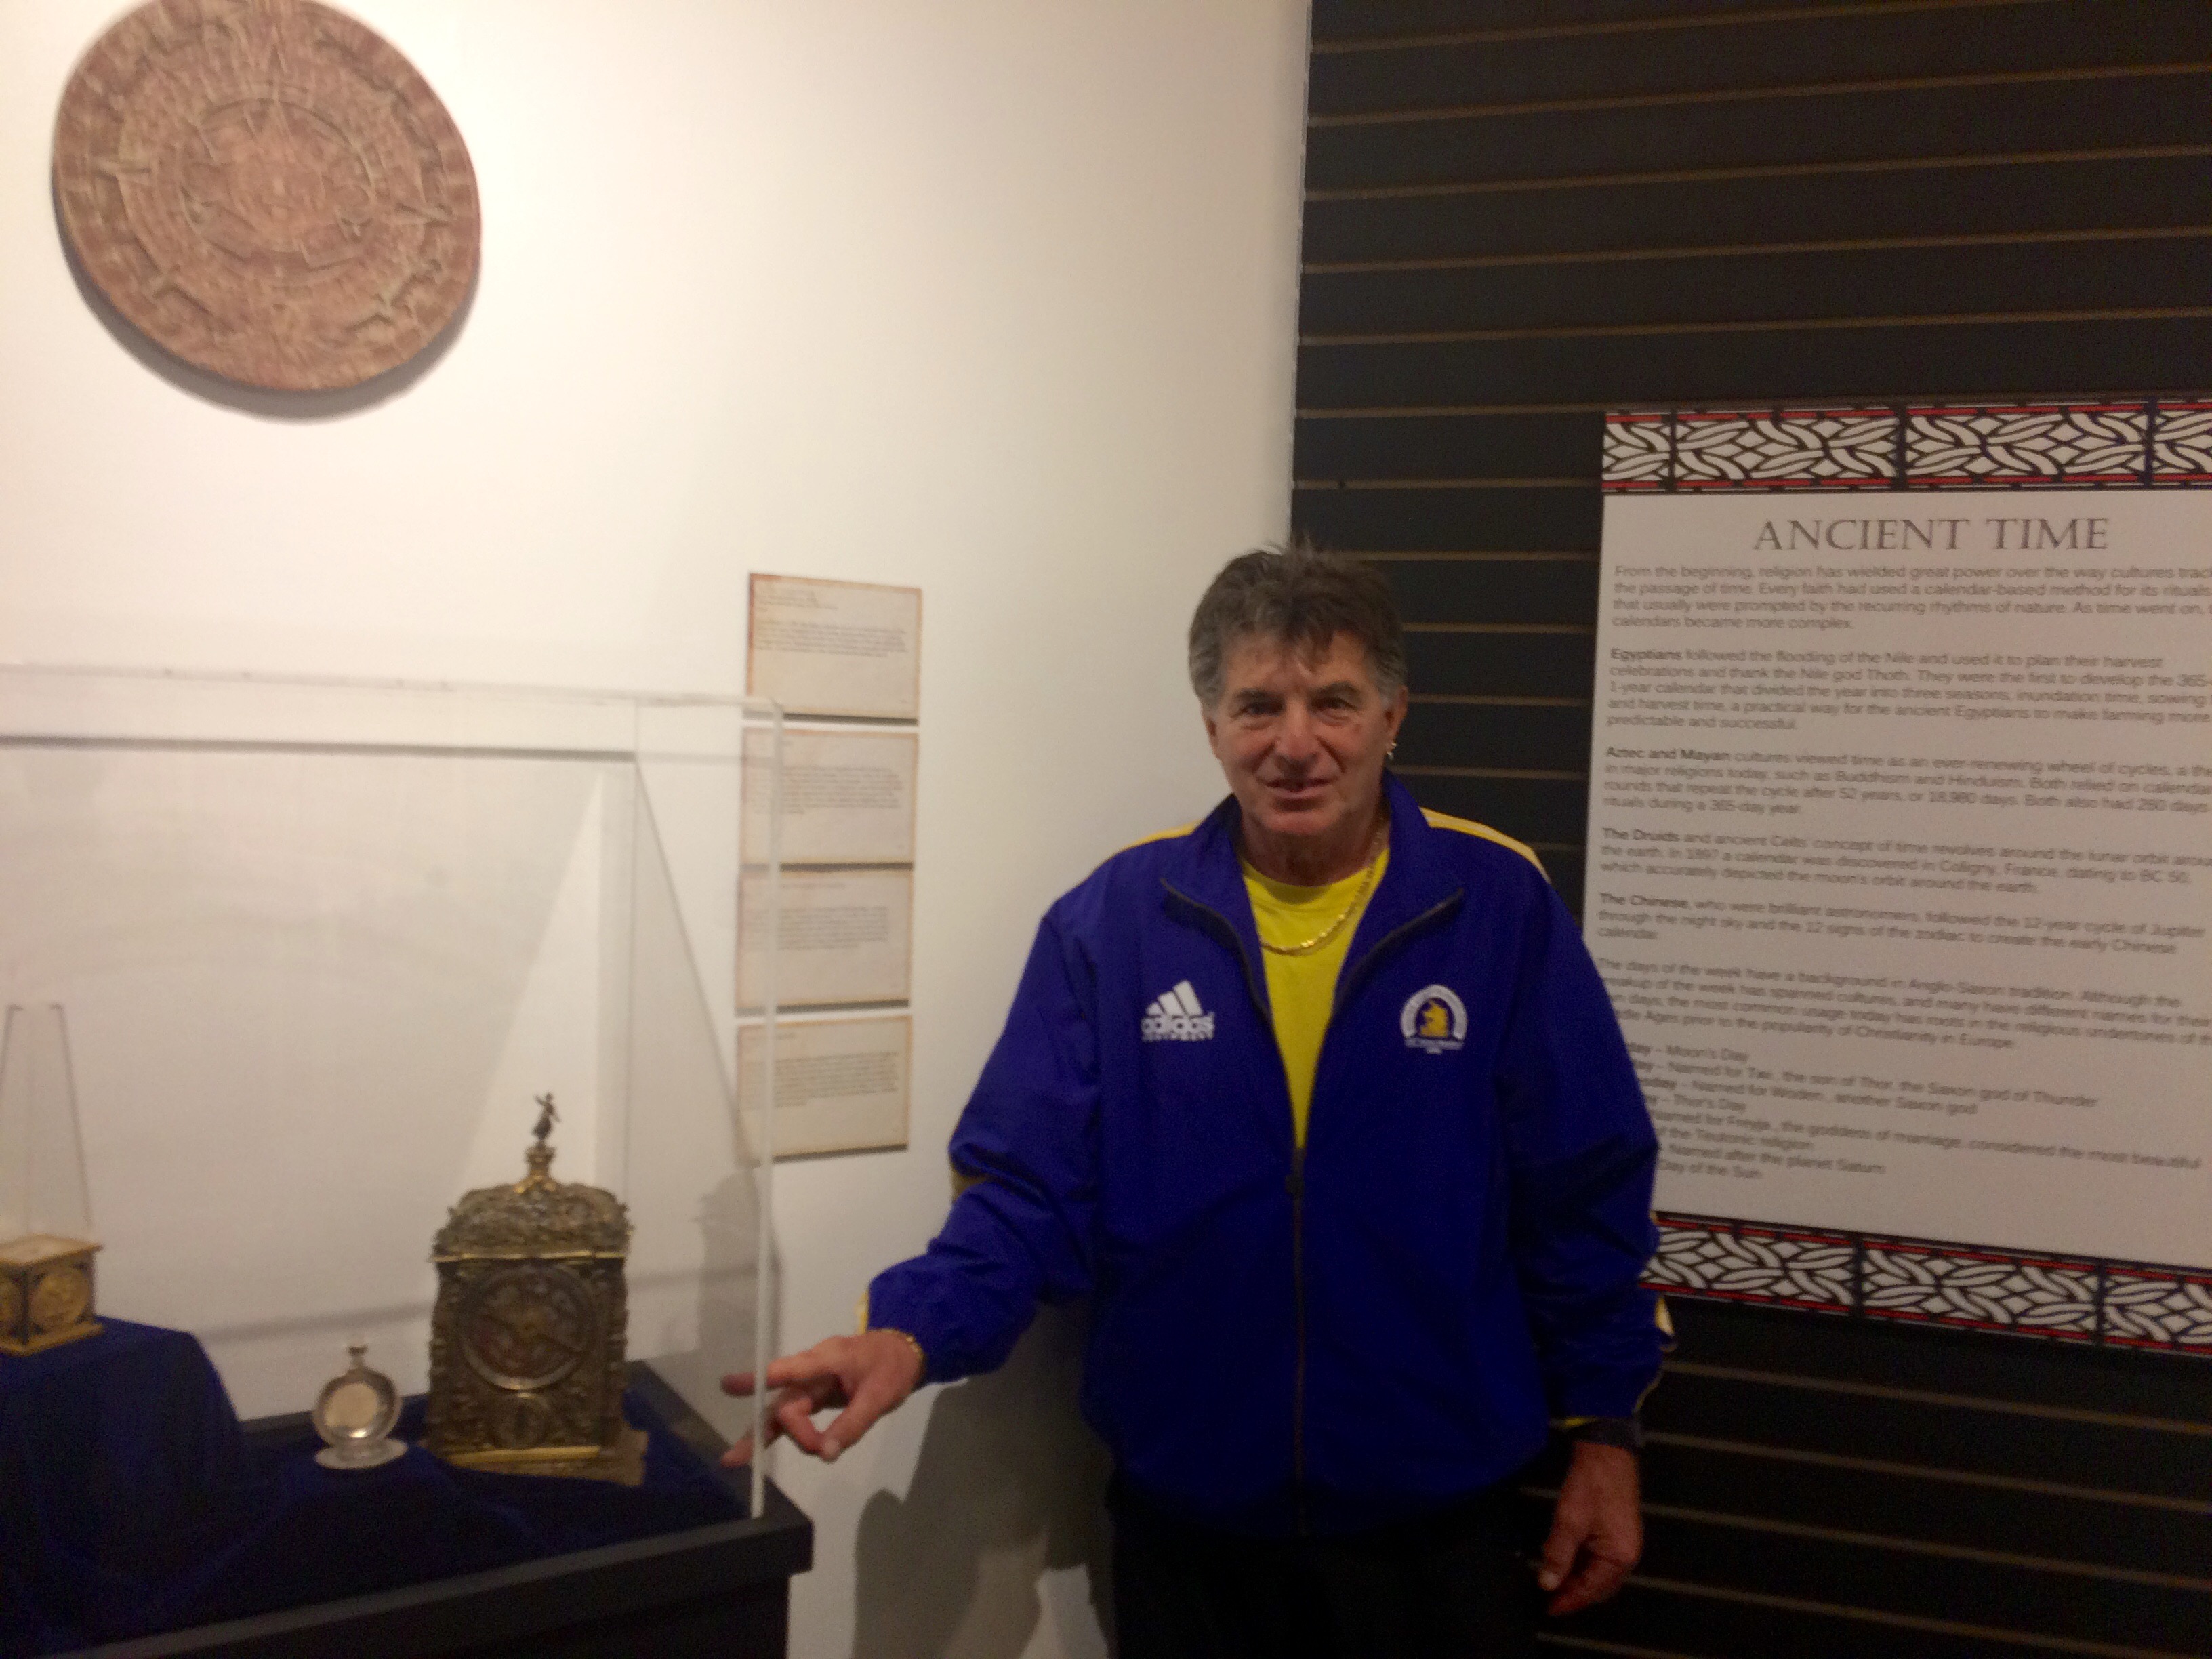 Peter Payack, inventor of The Stonehenge watch™, at the National Watch & Clock museum, The Stonehenge watch™ was the featured exhibit in its “Sacred: Religious Symbolism and the Concept of Time”.